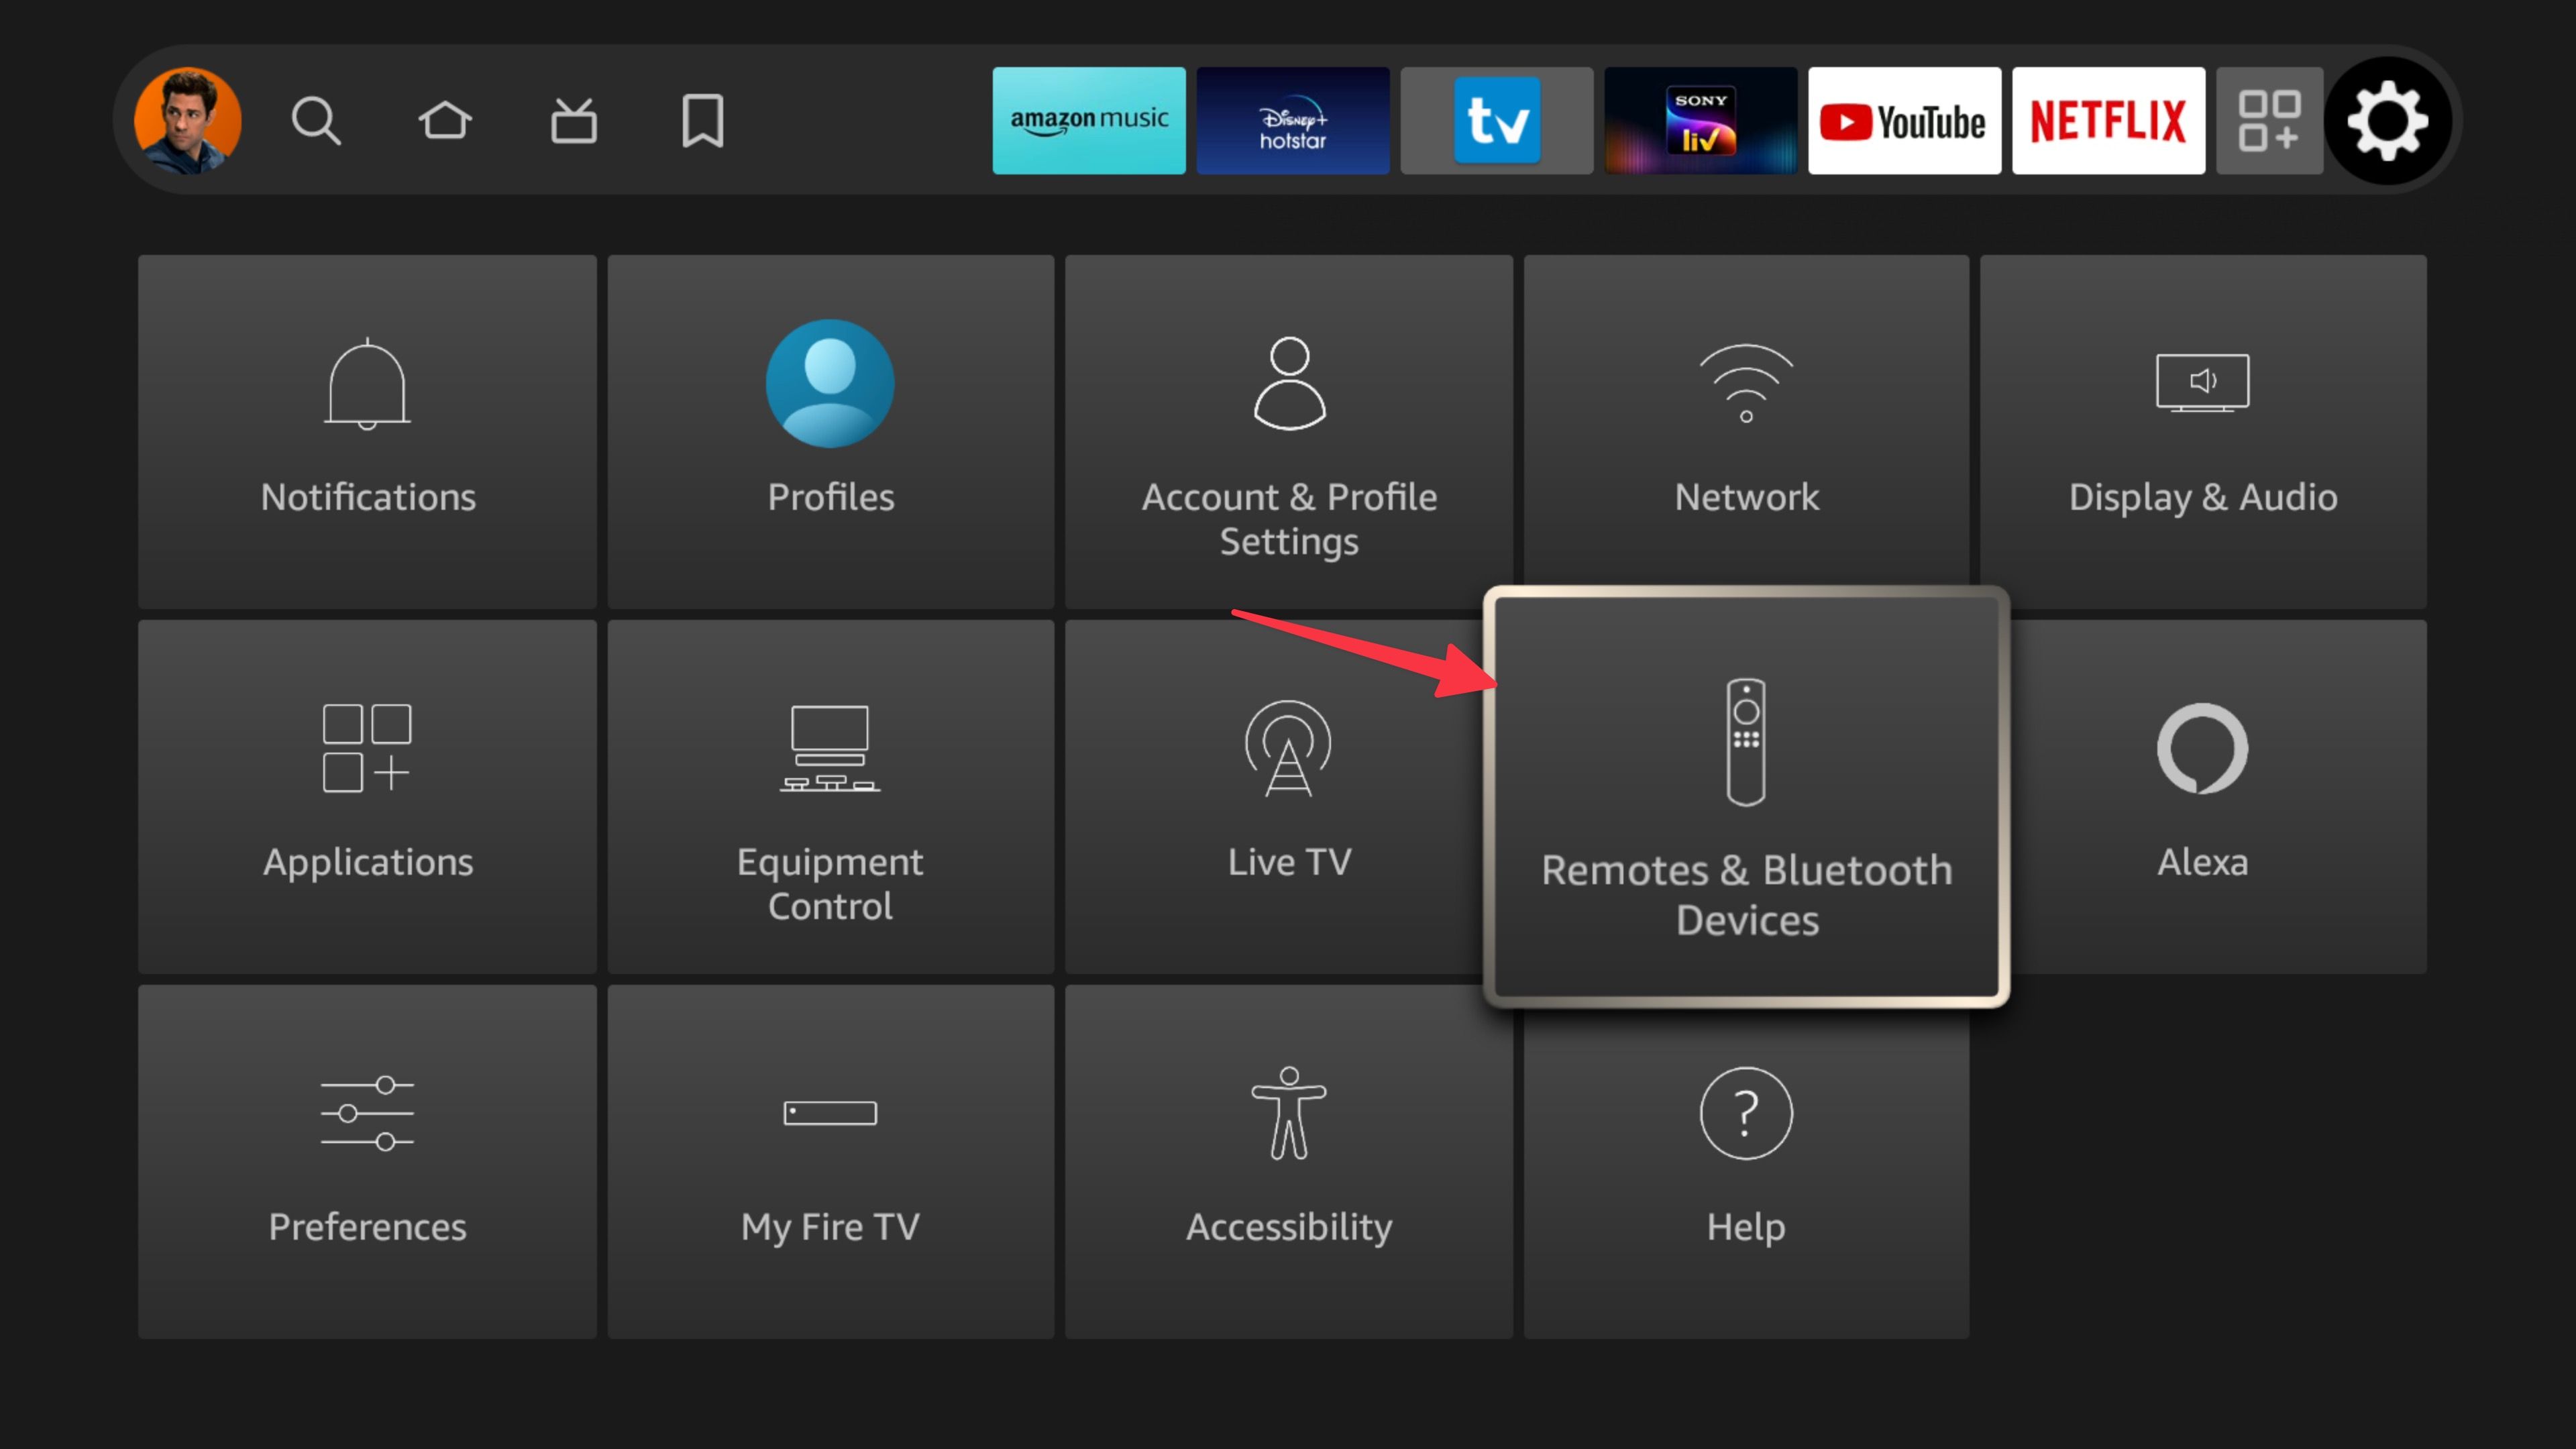 remote and bluetooth devices on Fire TV